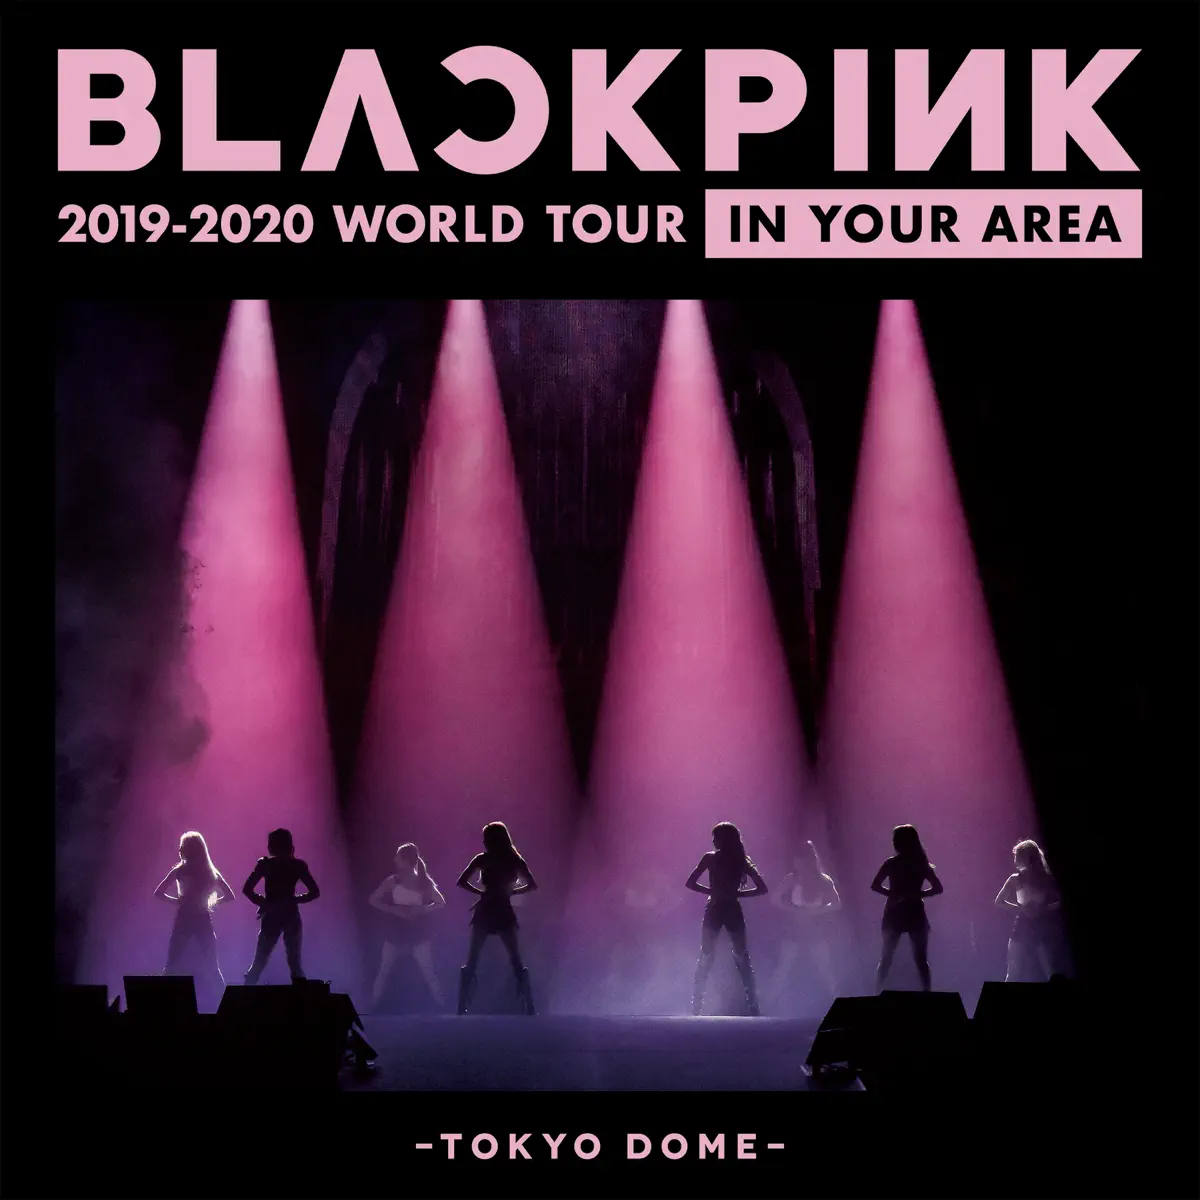 BLACKPINK - BLACKPINK 2019-2020 WORLD TOUR IN YOUR AREA - TOKYO DOME (Live) (2020) [iTunes Plus AAC M4A]-新房子